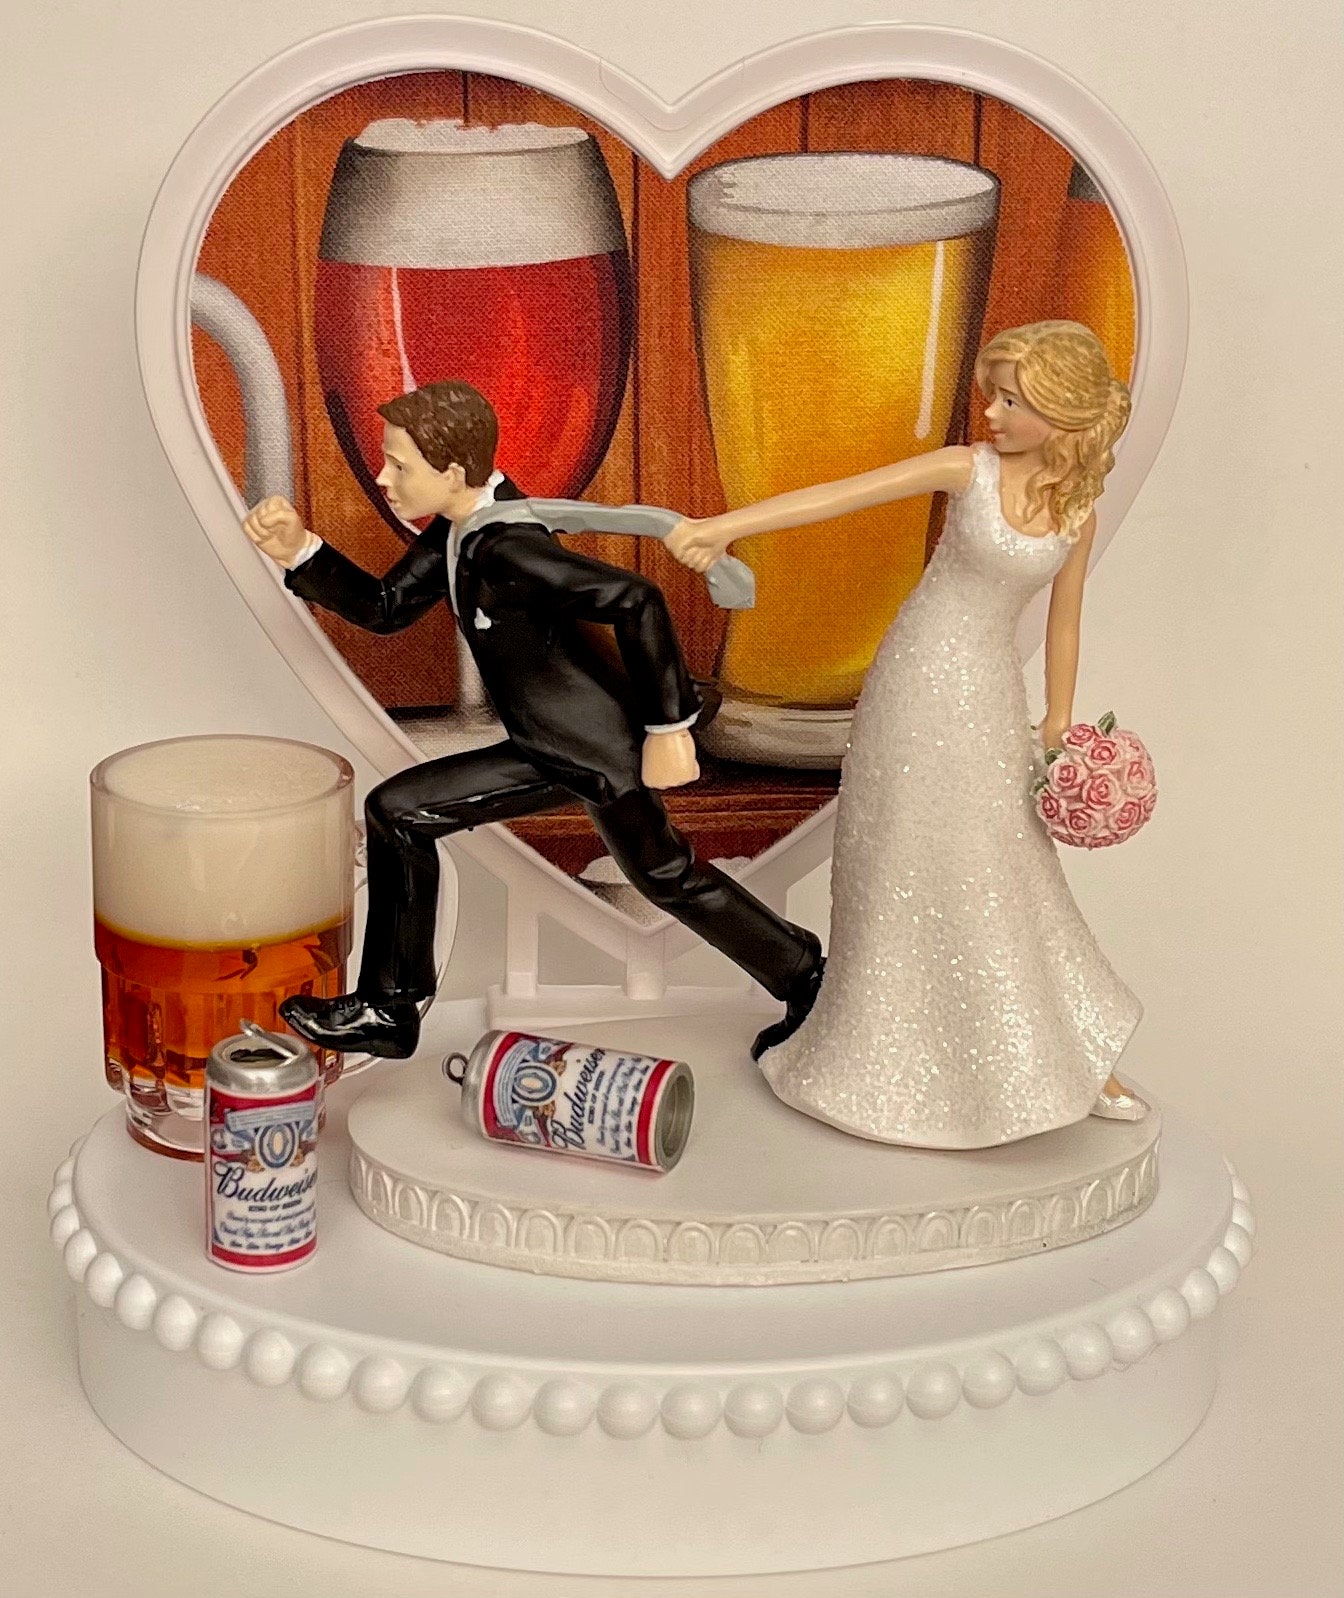 Wedding Cake Topper Budweiser Beer Themed Bud Cans Mug Running Funny Bride and Groom One-of-a-Kind Fun Humorous Reception Groom's Cake Top